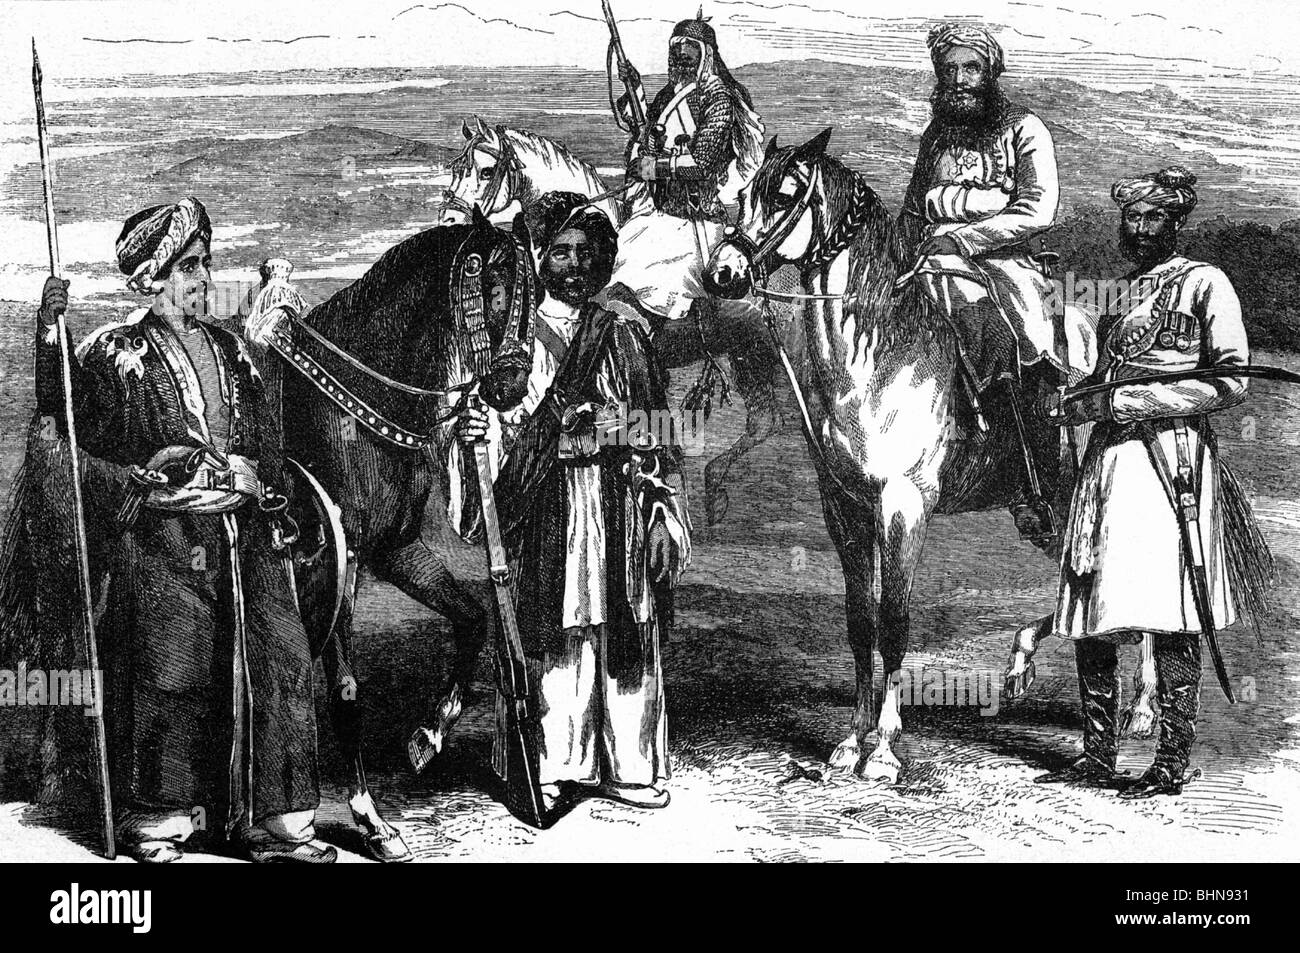 geography / travel, India, military, British East Indian Company, Indic Indian soldiers, officer of column (military formation), Afghan, irregular rider, wood engraving, circa 1858, Stock Photo